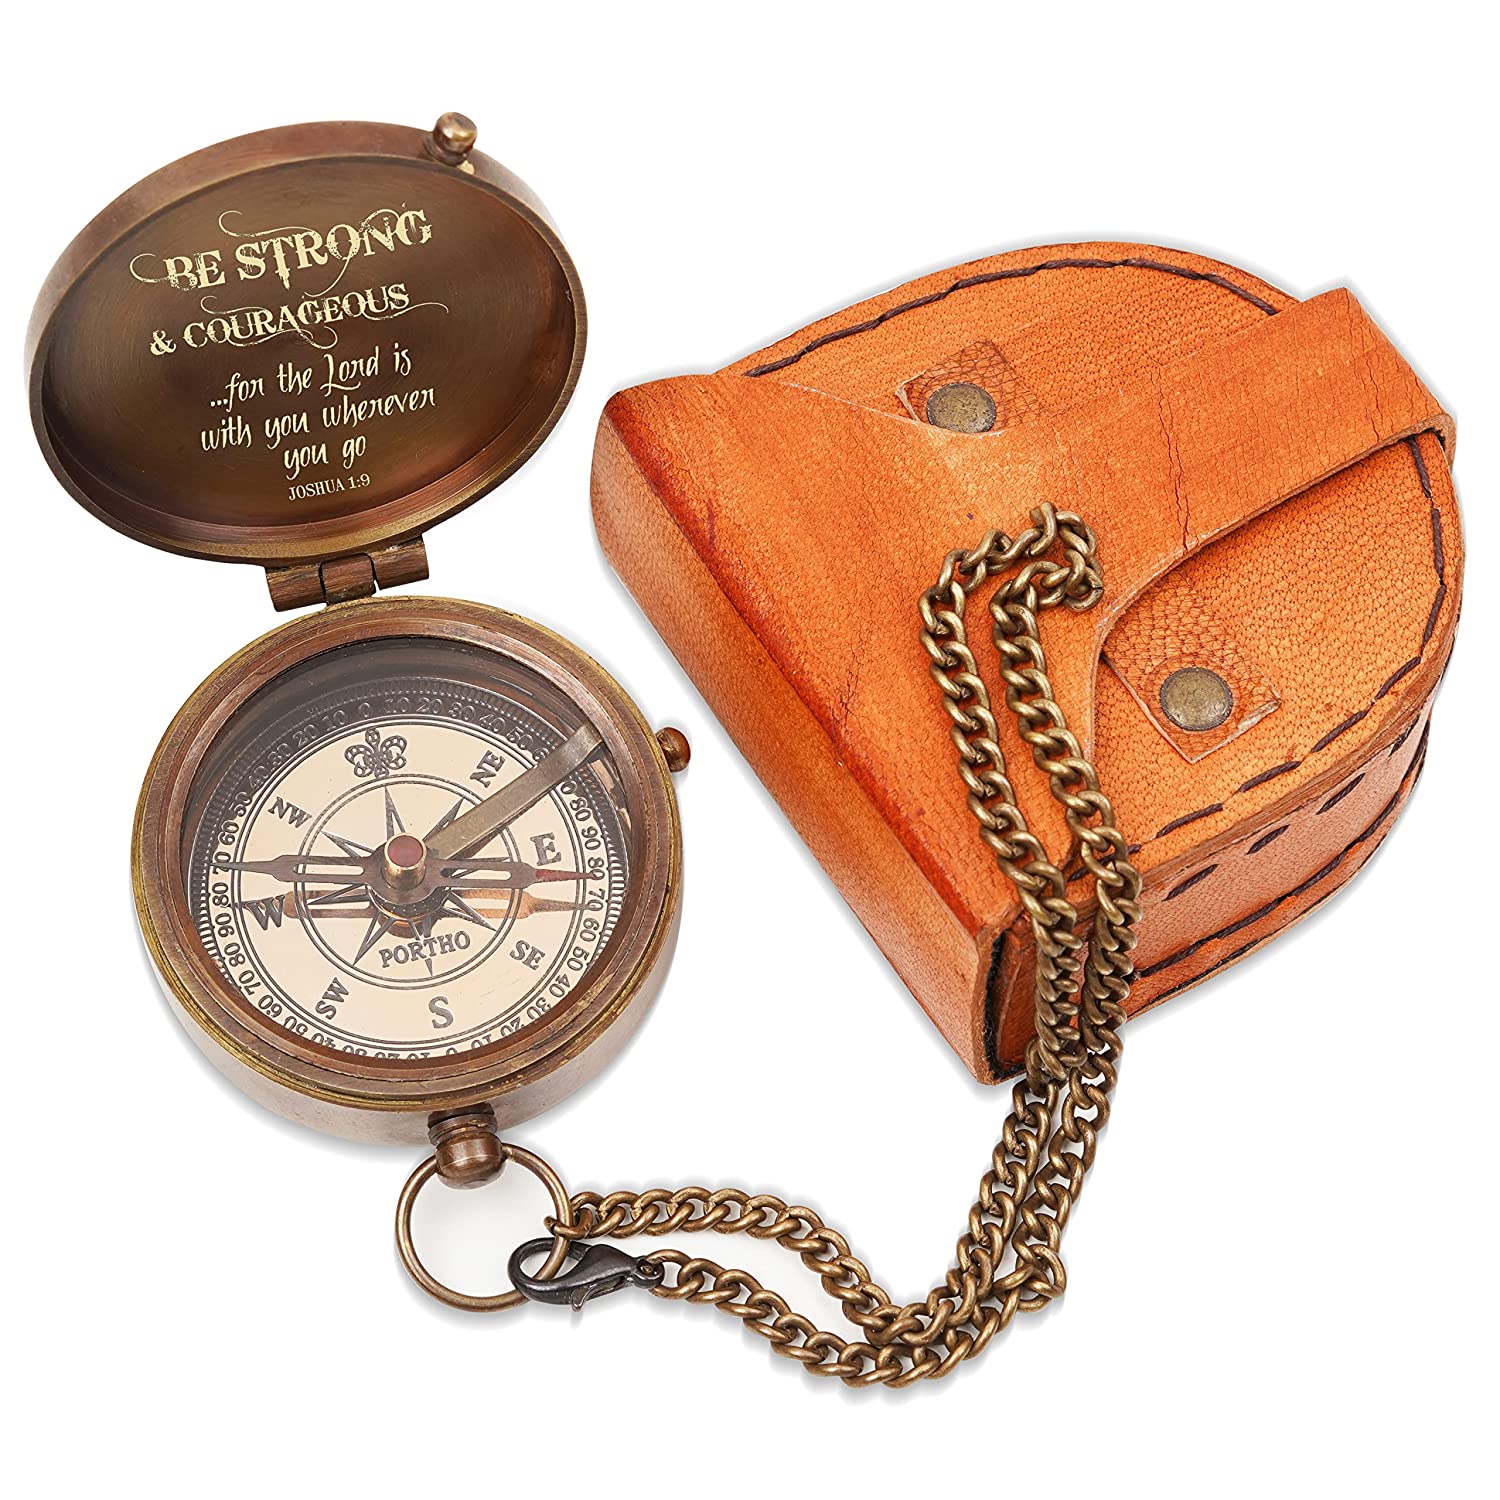 Be strong and courageous Engraved Compass with creative leather pouch, Meaningful inspirational gift for loved, Birthday gift, Anniversary gift, confirmation gift, Christmas gift